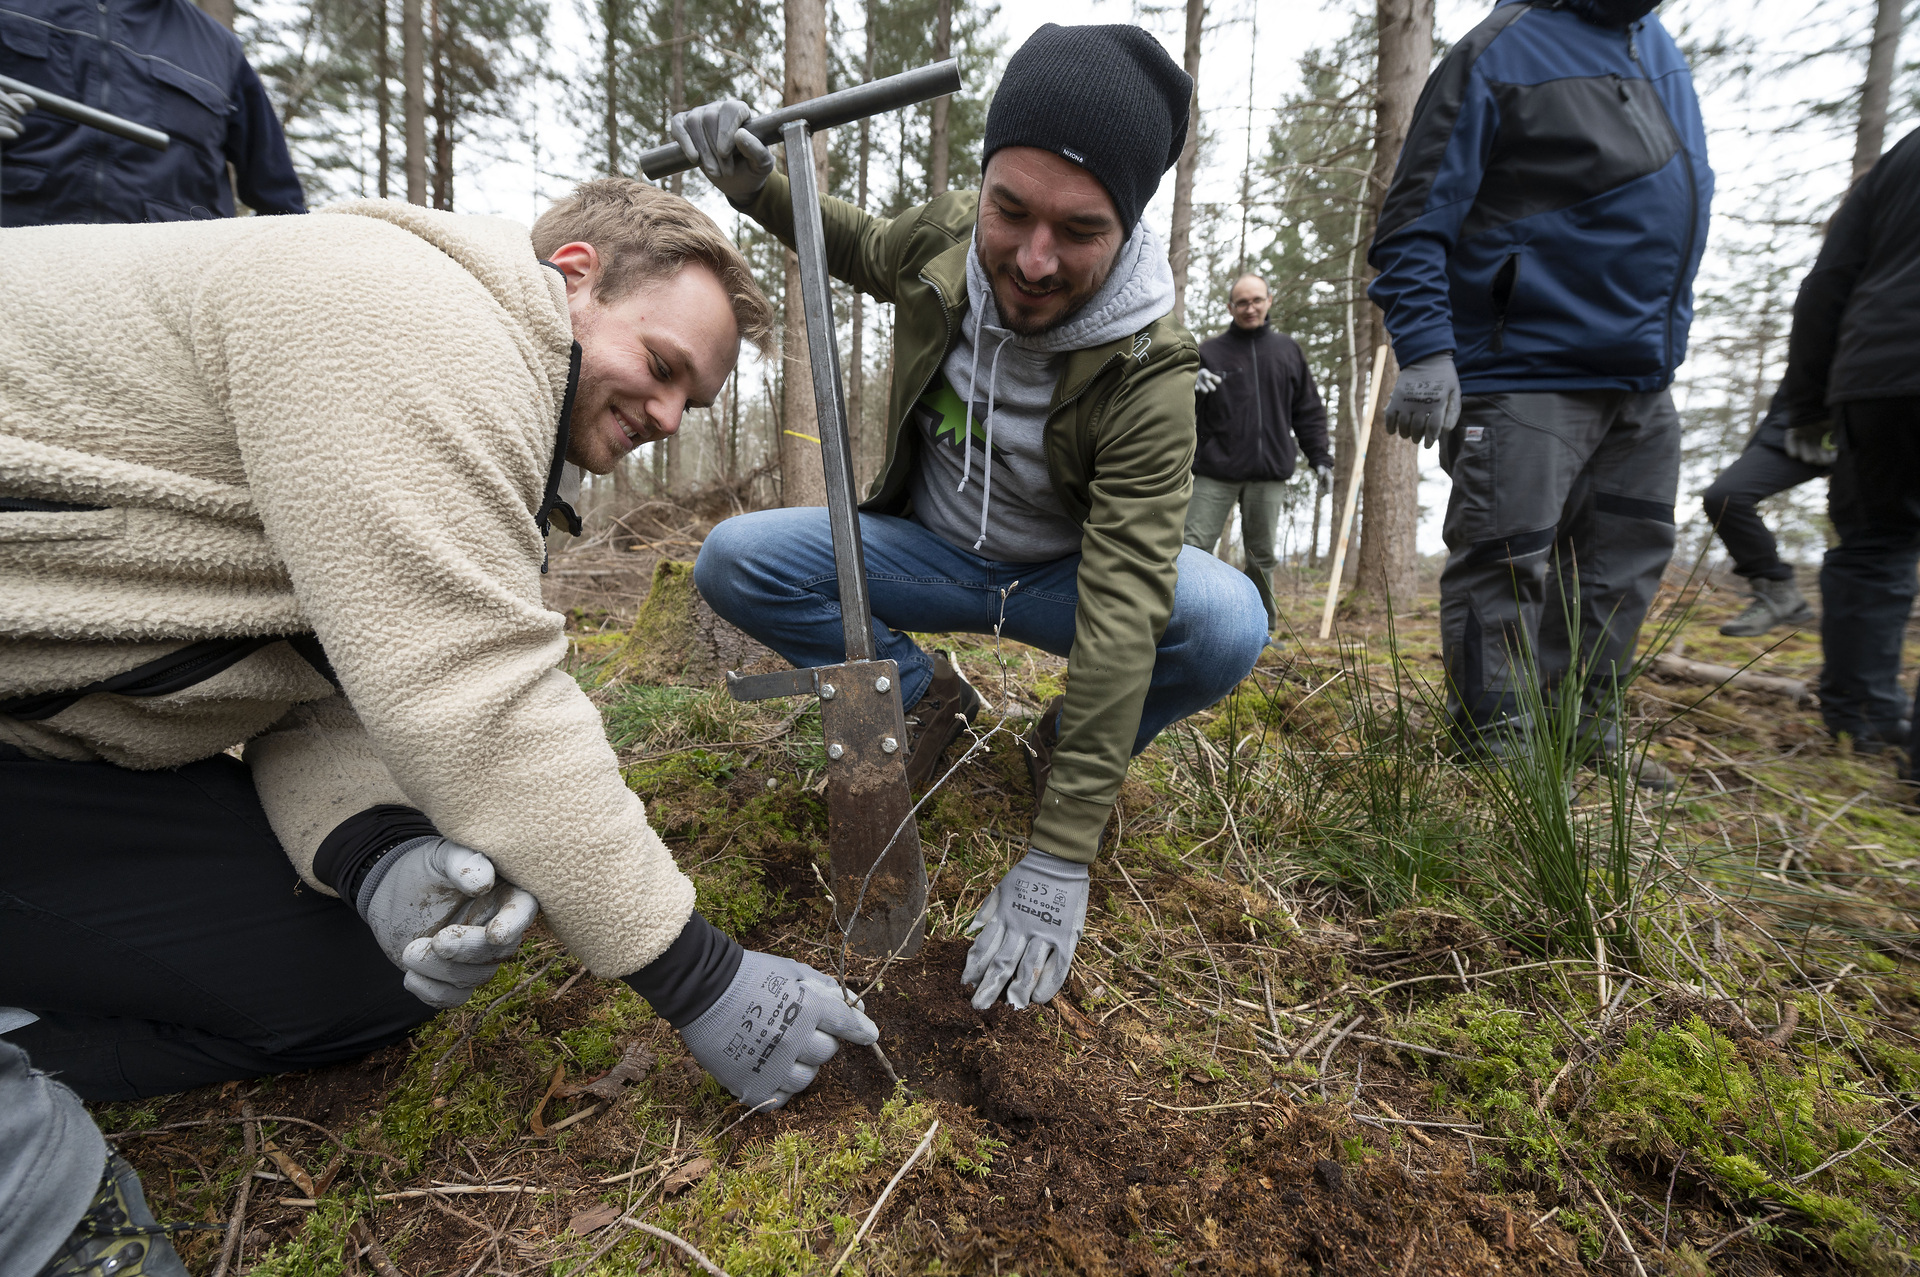 Get to the spades, get set, go! Daimler truck employees plant trees for near-natural reforestation